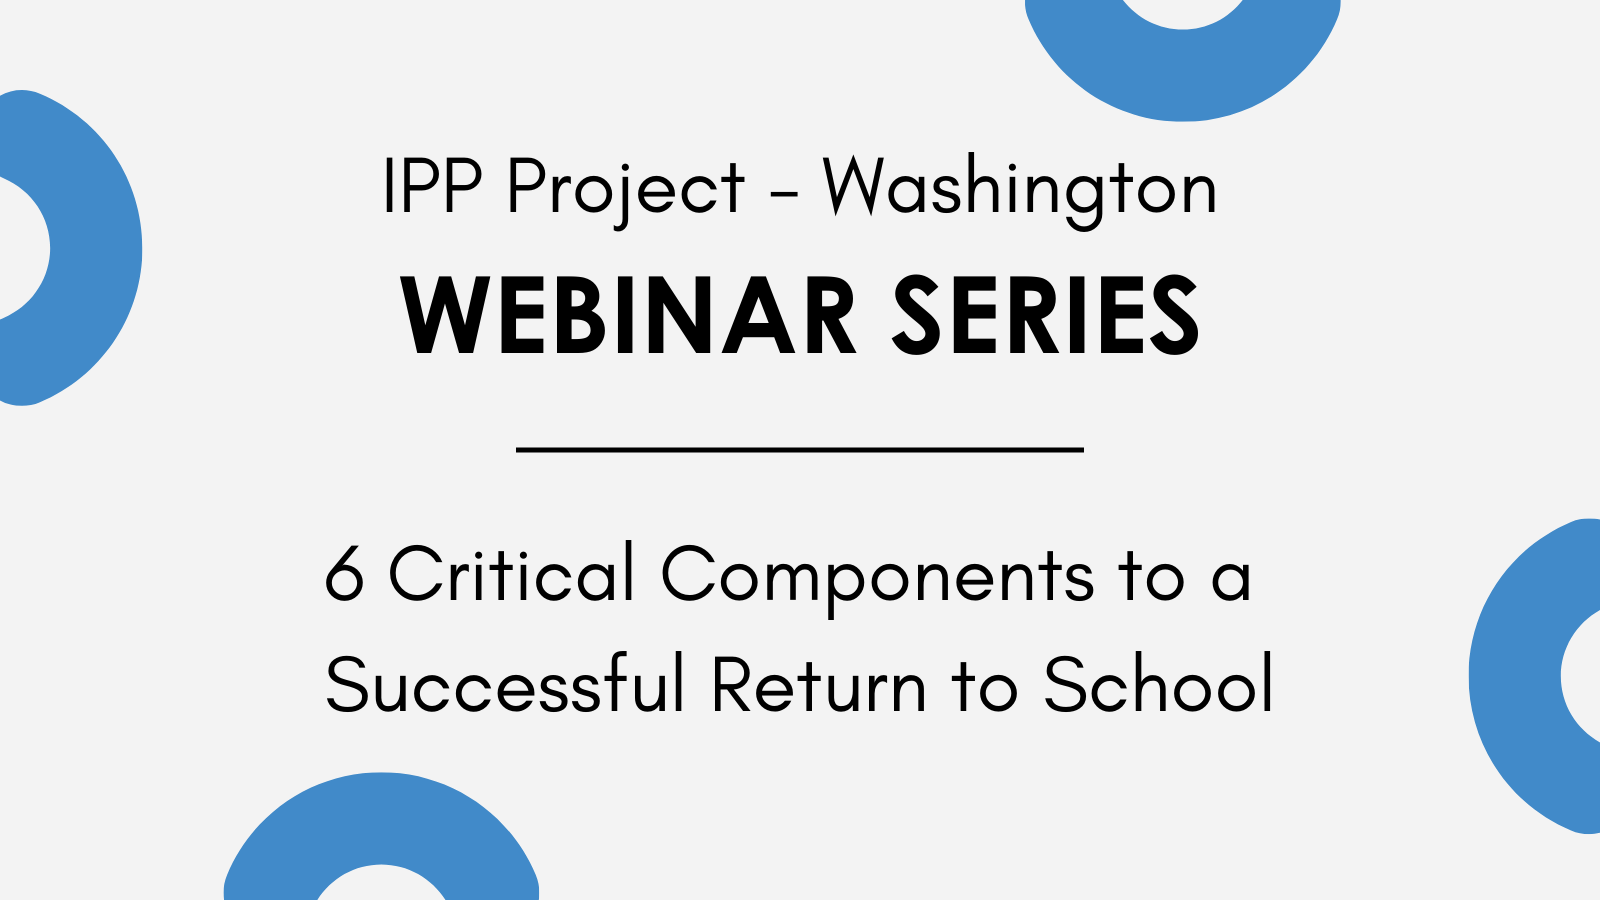 Join us as we reimagine what education might look like and identify key components to consider for a successful return to in-person learning.